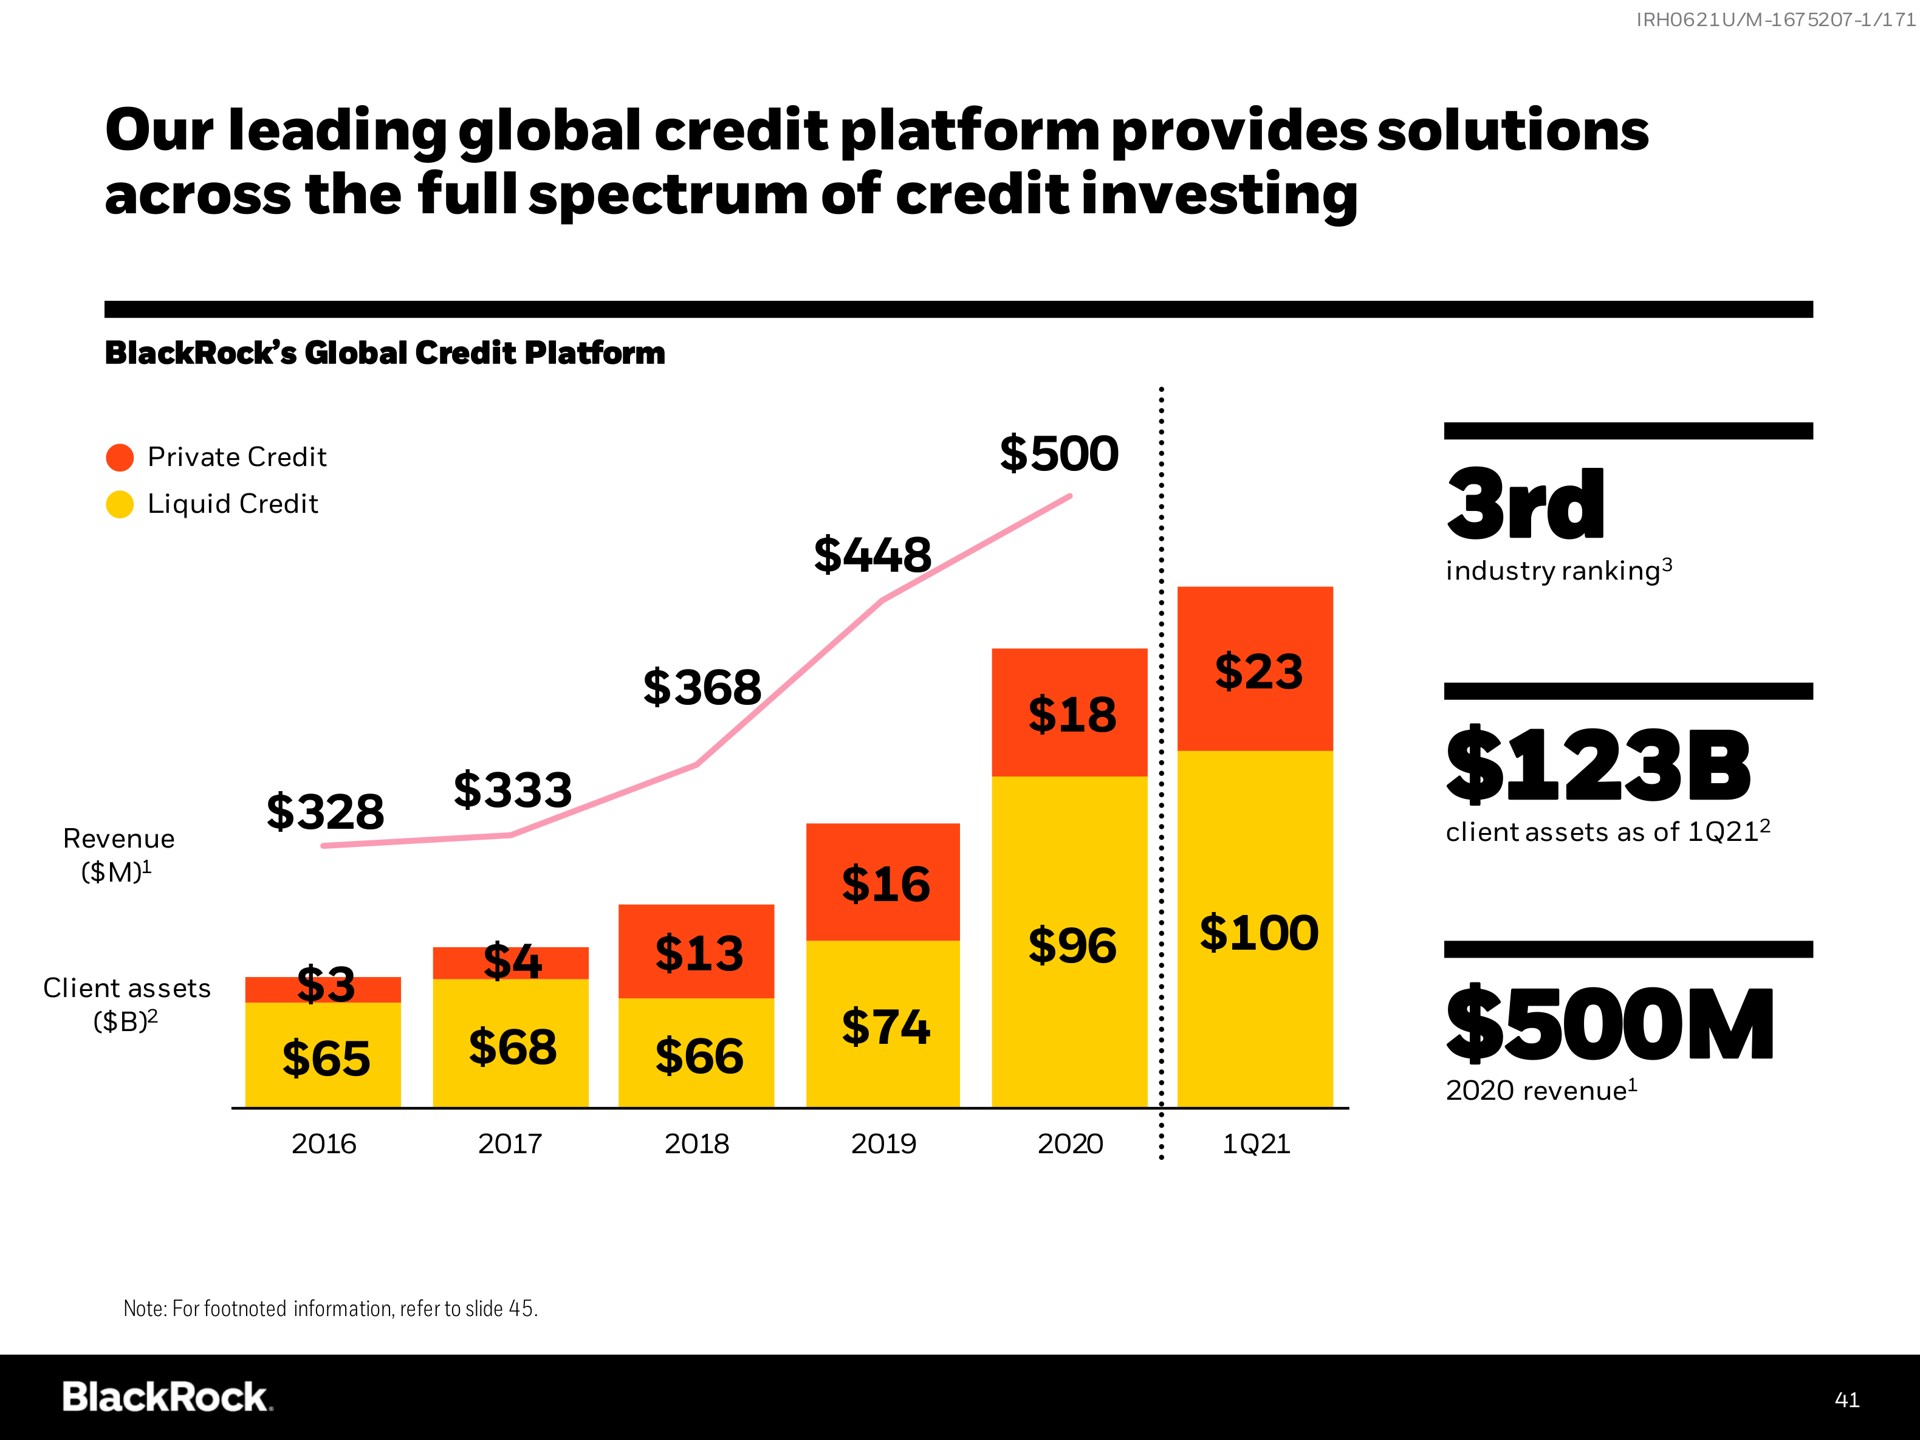 our leading global credit platform provides solutions across the full spectrum of credit investing | BlackRock